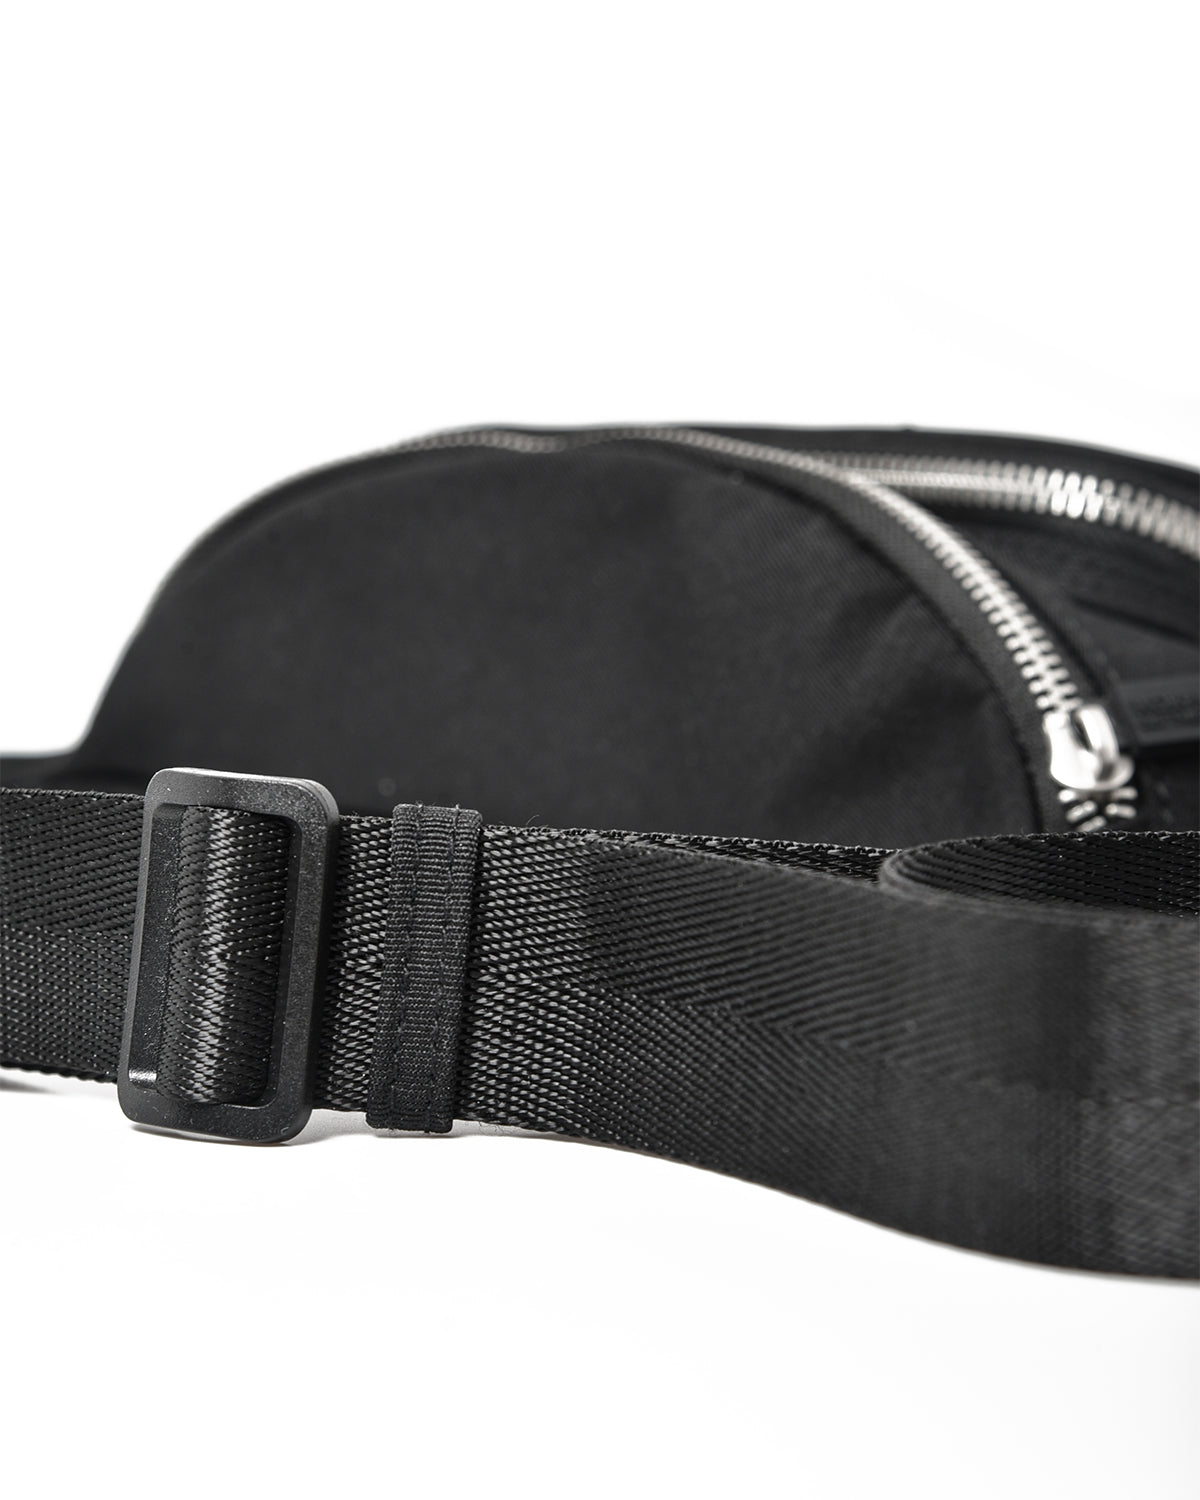 Plain Black Fanny Pack With Logo Label On The Front